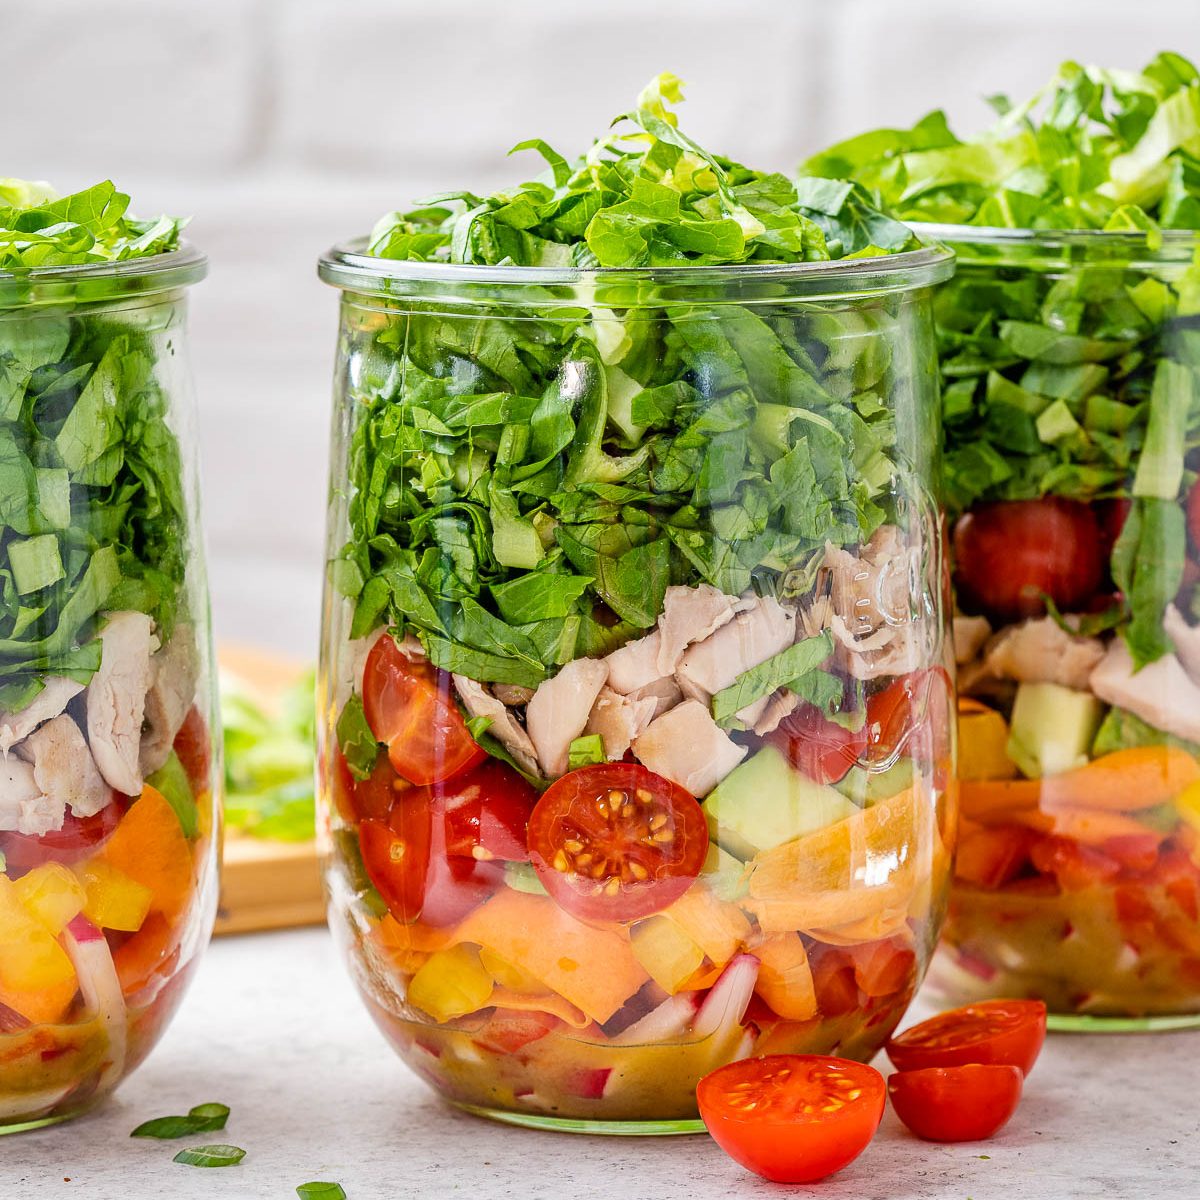 https://cleanfoodcrush.com/wp-content/uploads/2022/01/Veggie-Packed-Chicken-Salad-in-a-Jar-clean-eating-recipe-1200x1200.jpg